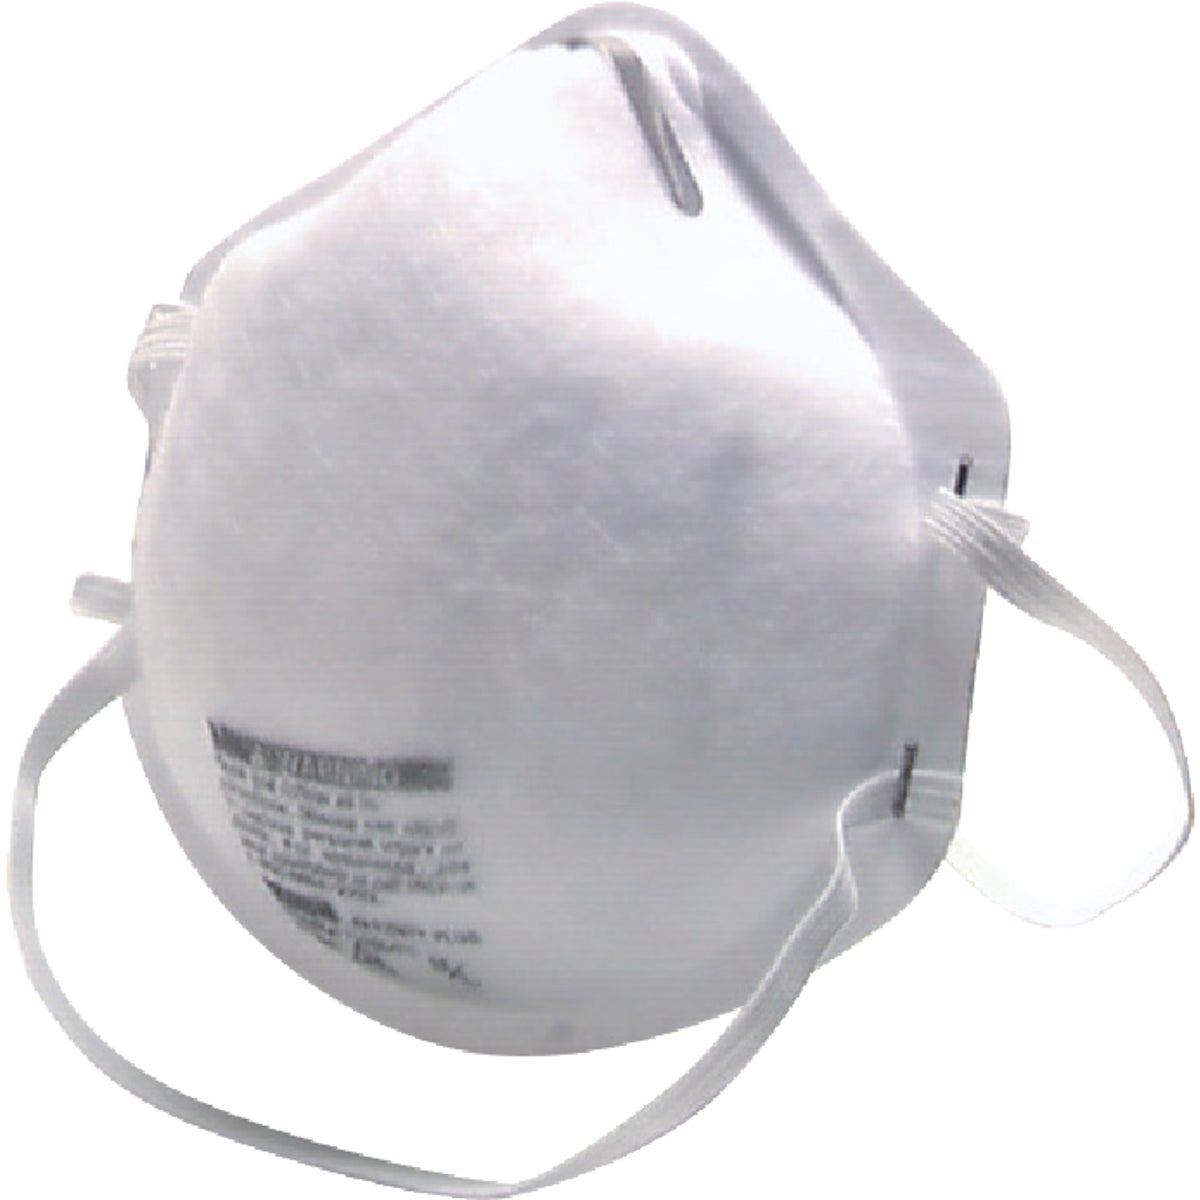 Safety Works N95 Harmful Dust Respirator (2-Pack)